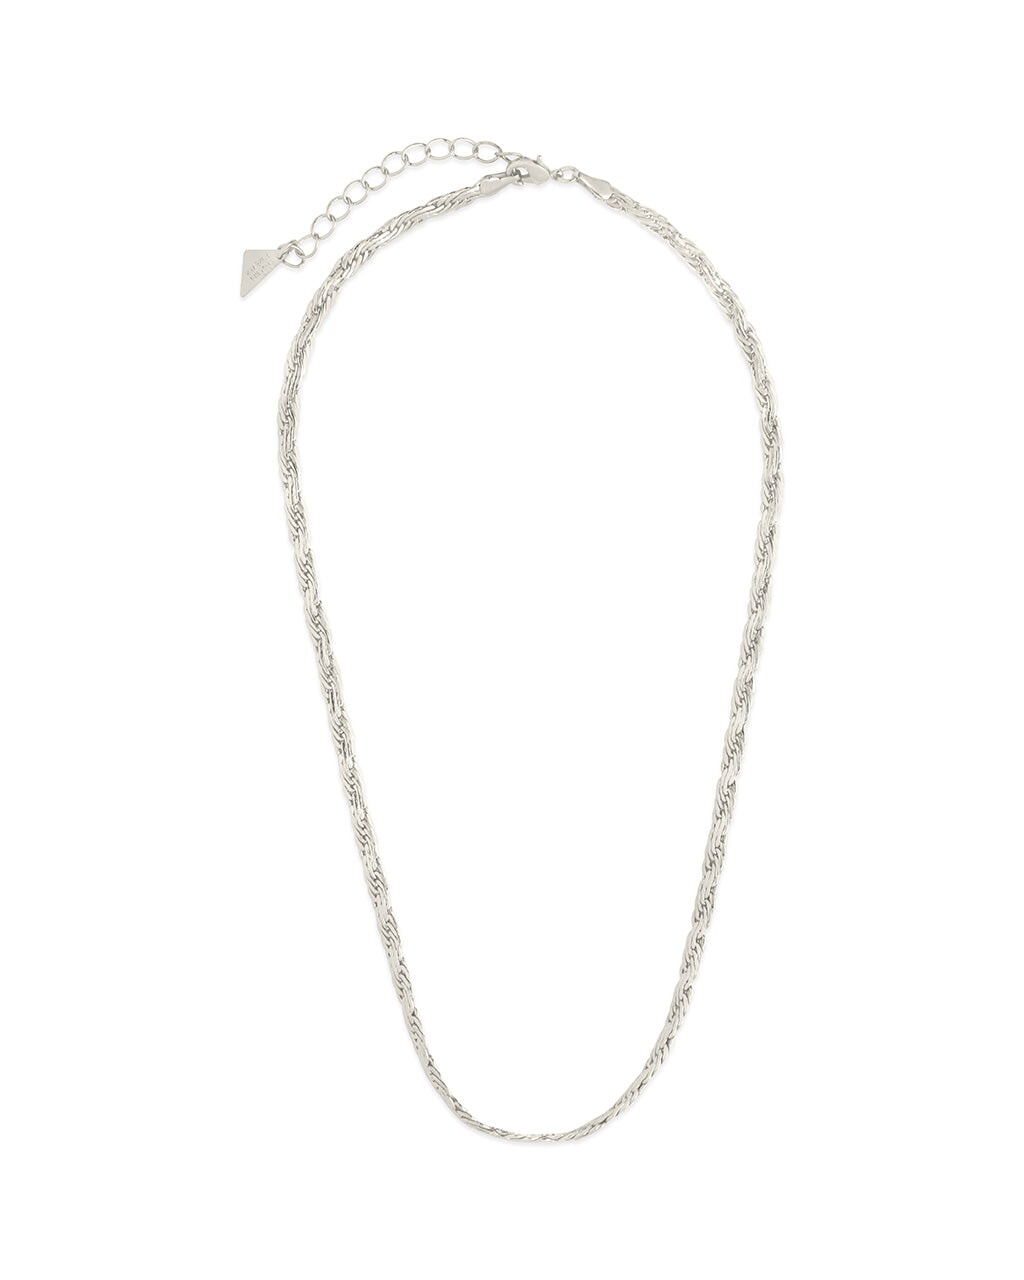 Brandy Chain Necklace Necklace Sterling Forever 